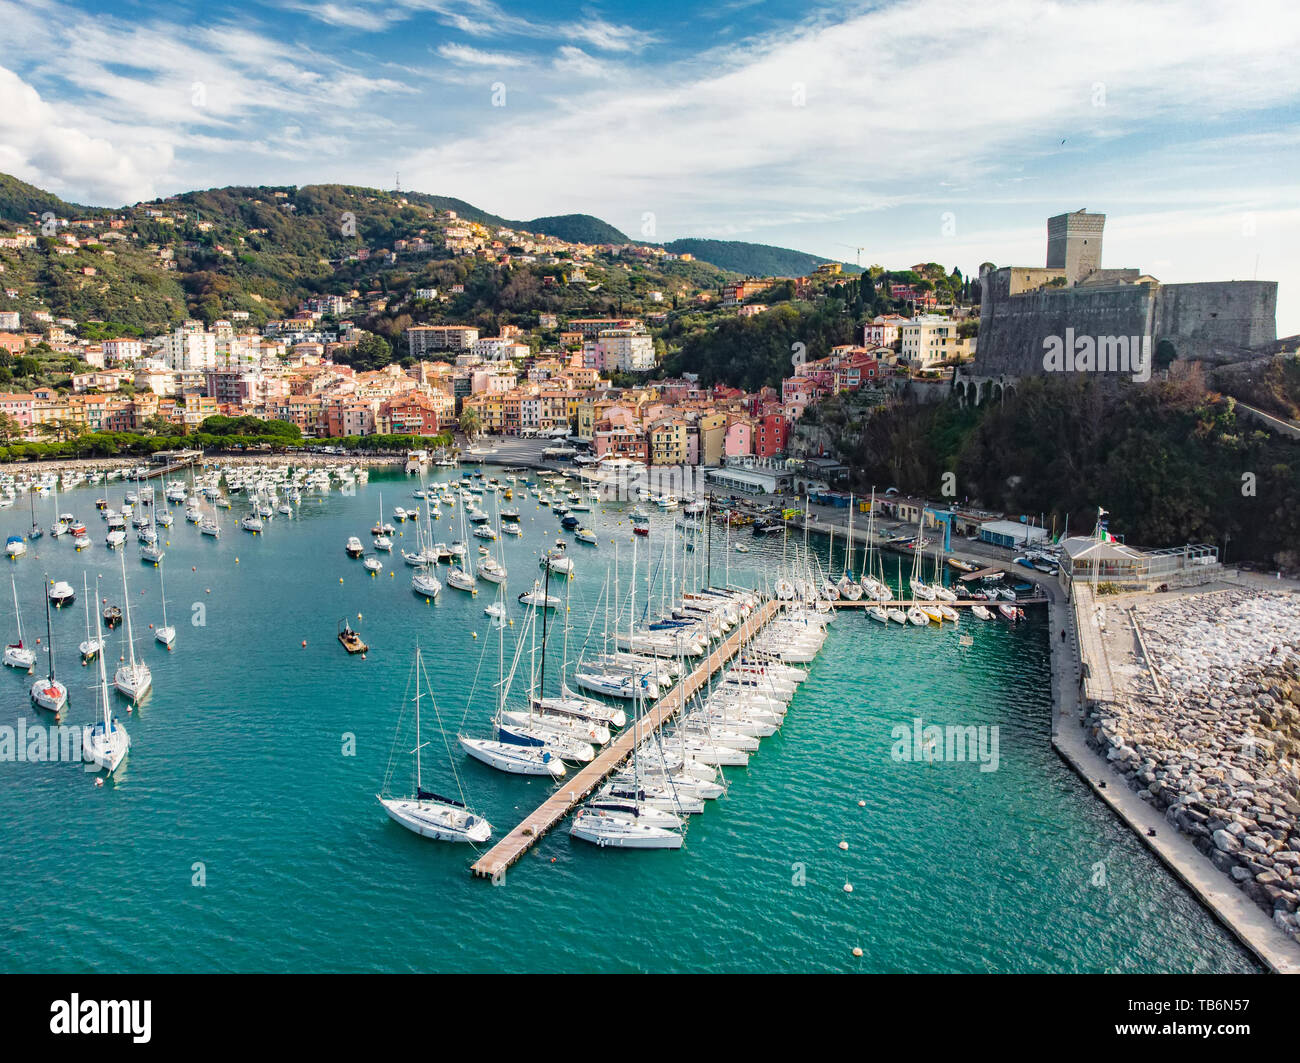 Aerial view of small yachts and fishing boats in Lerici town, located in the province of La Spezia in Liguria, part of the Italian Riviera, Italy. Stock Photo